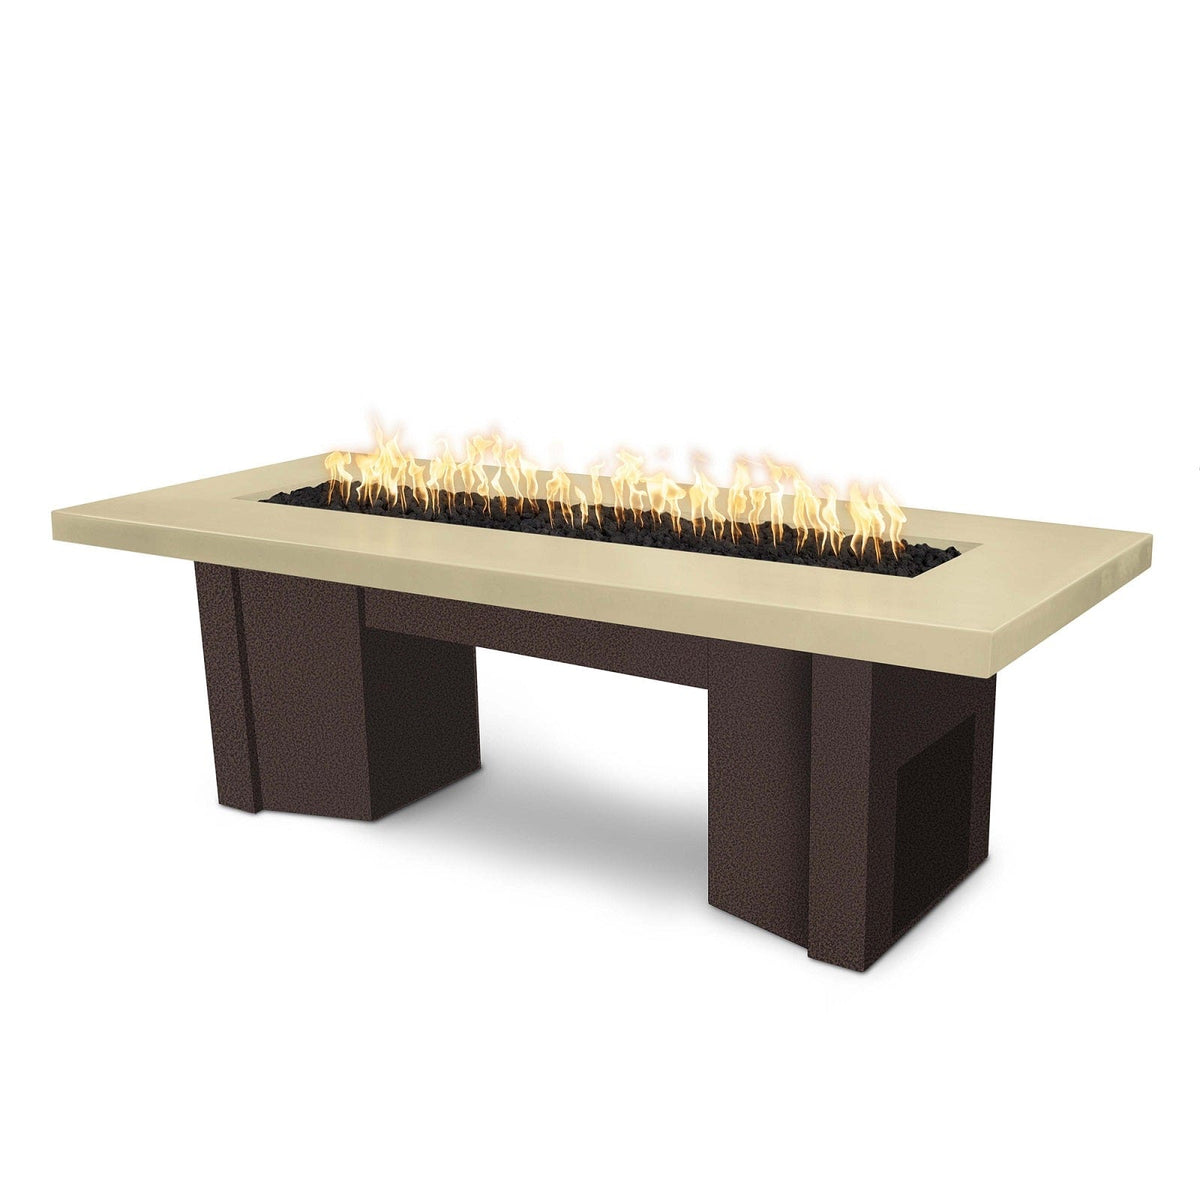 The Outdoor Plus Fire Features Vanilla (-VAN) / Copper Vein Powder Coated Steel (-CPV) The Outdoor Plus 78&quot; Alameda Fire Table Smooth Concrete in Liquid Propane - Flame Sense System with Push Button Spark Igniter / OPT-ALMGFRC78FSEN-LP